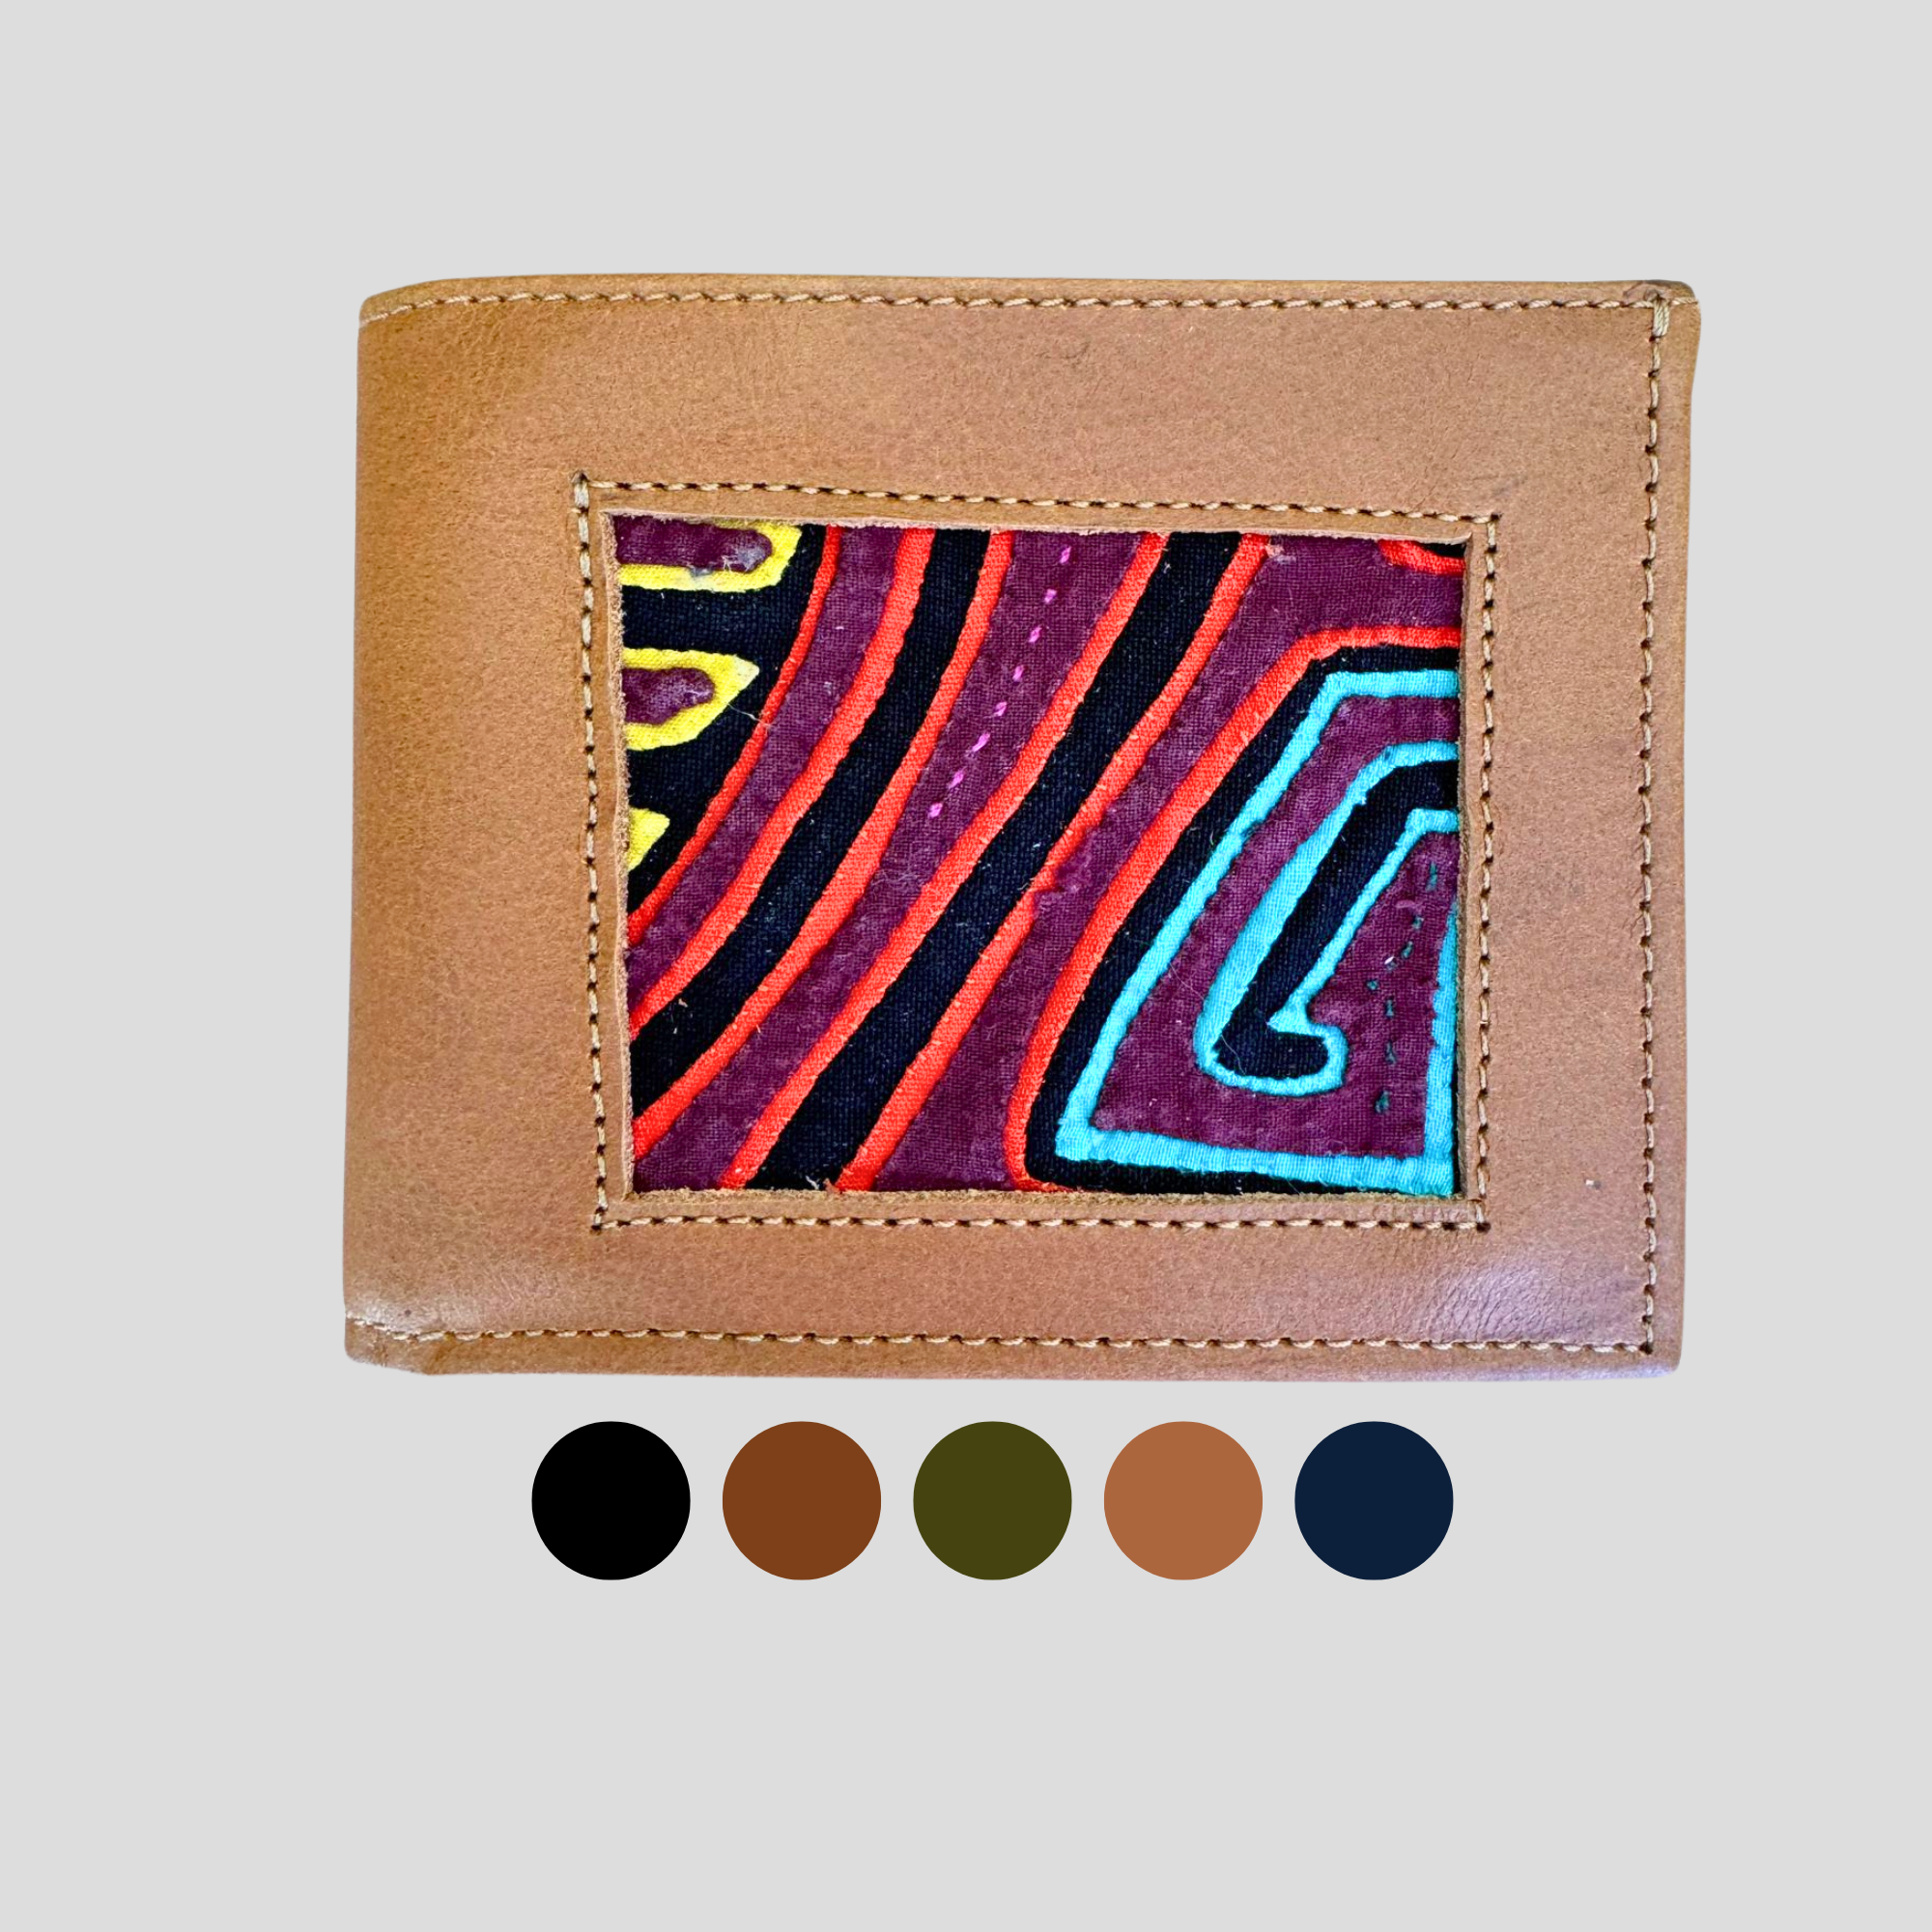 Man's Wallet Mola Square I Genuine One of a Kind Leather Wallet I  Mola Square Wallet from Colombia